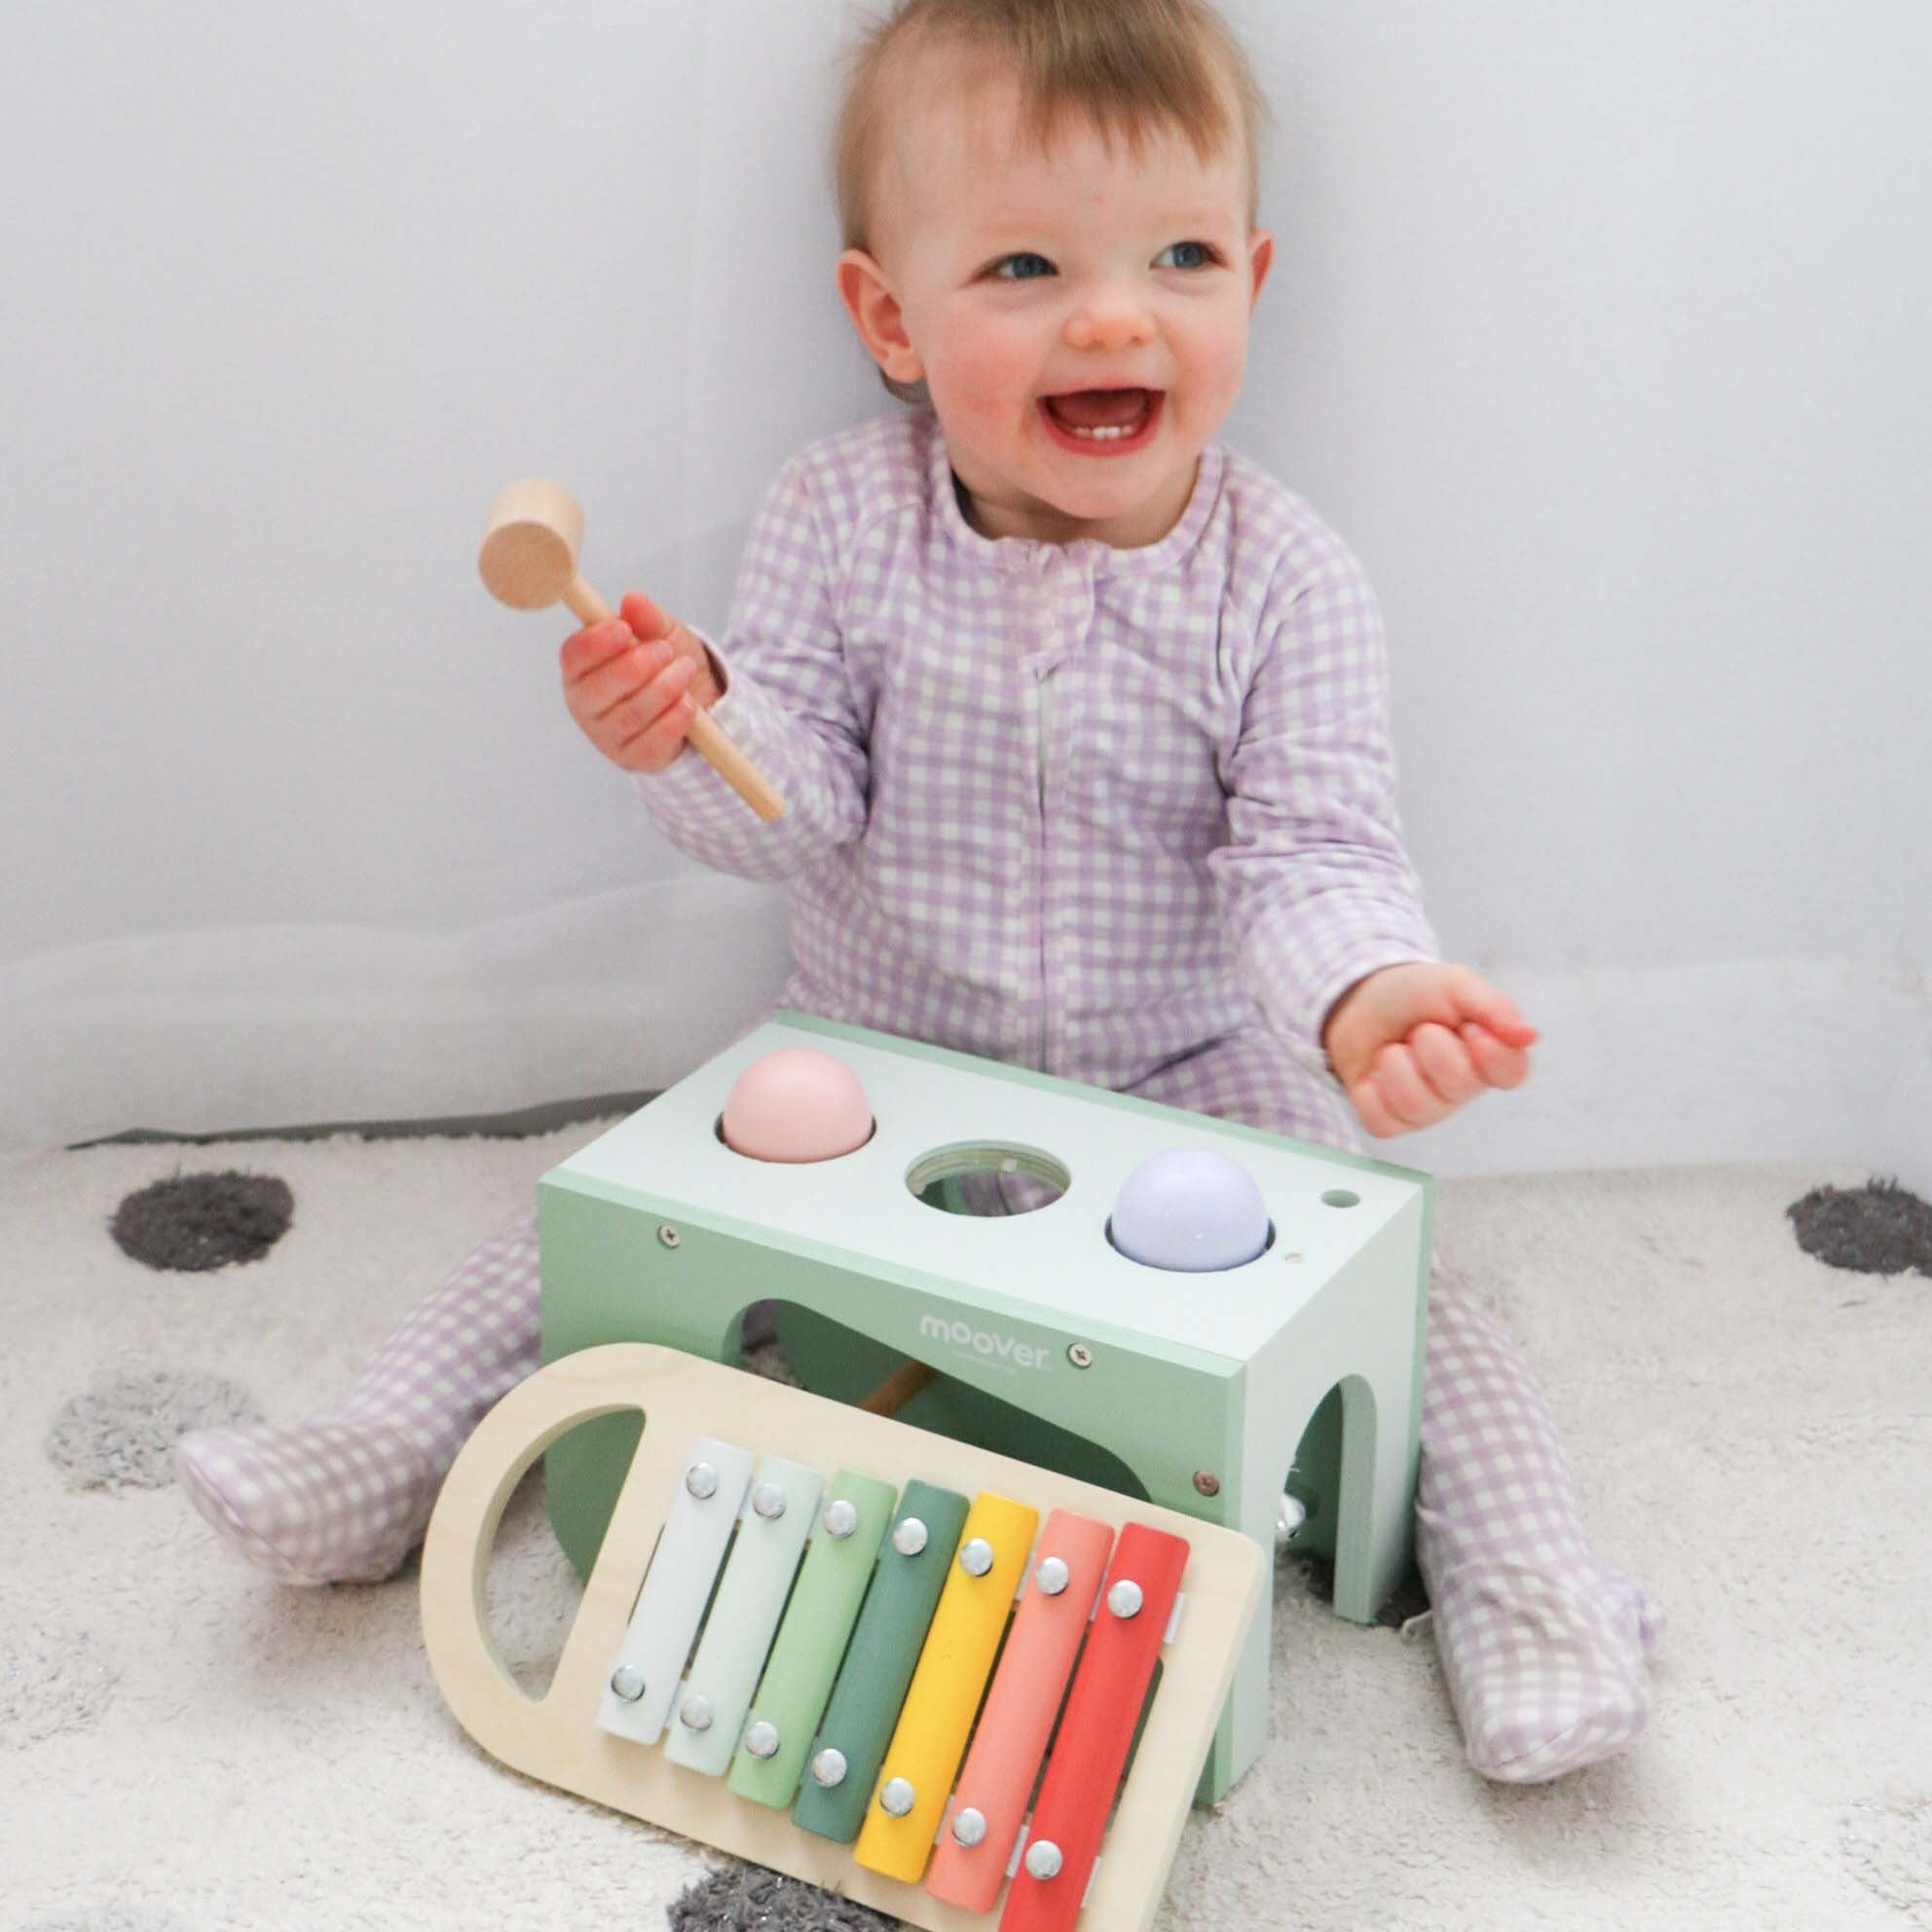 Moover Musical Tap Tap Green - Tiny Tots Baby Store 